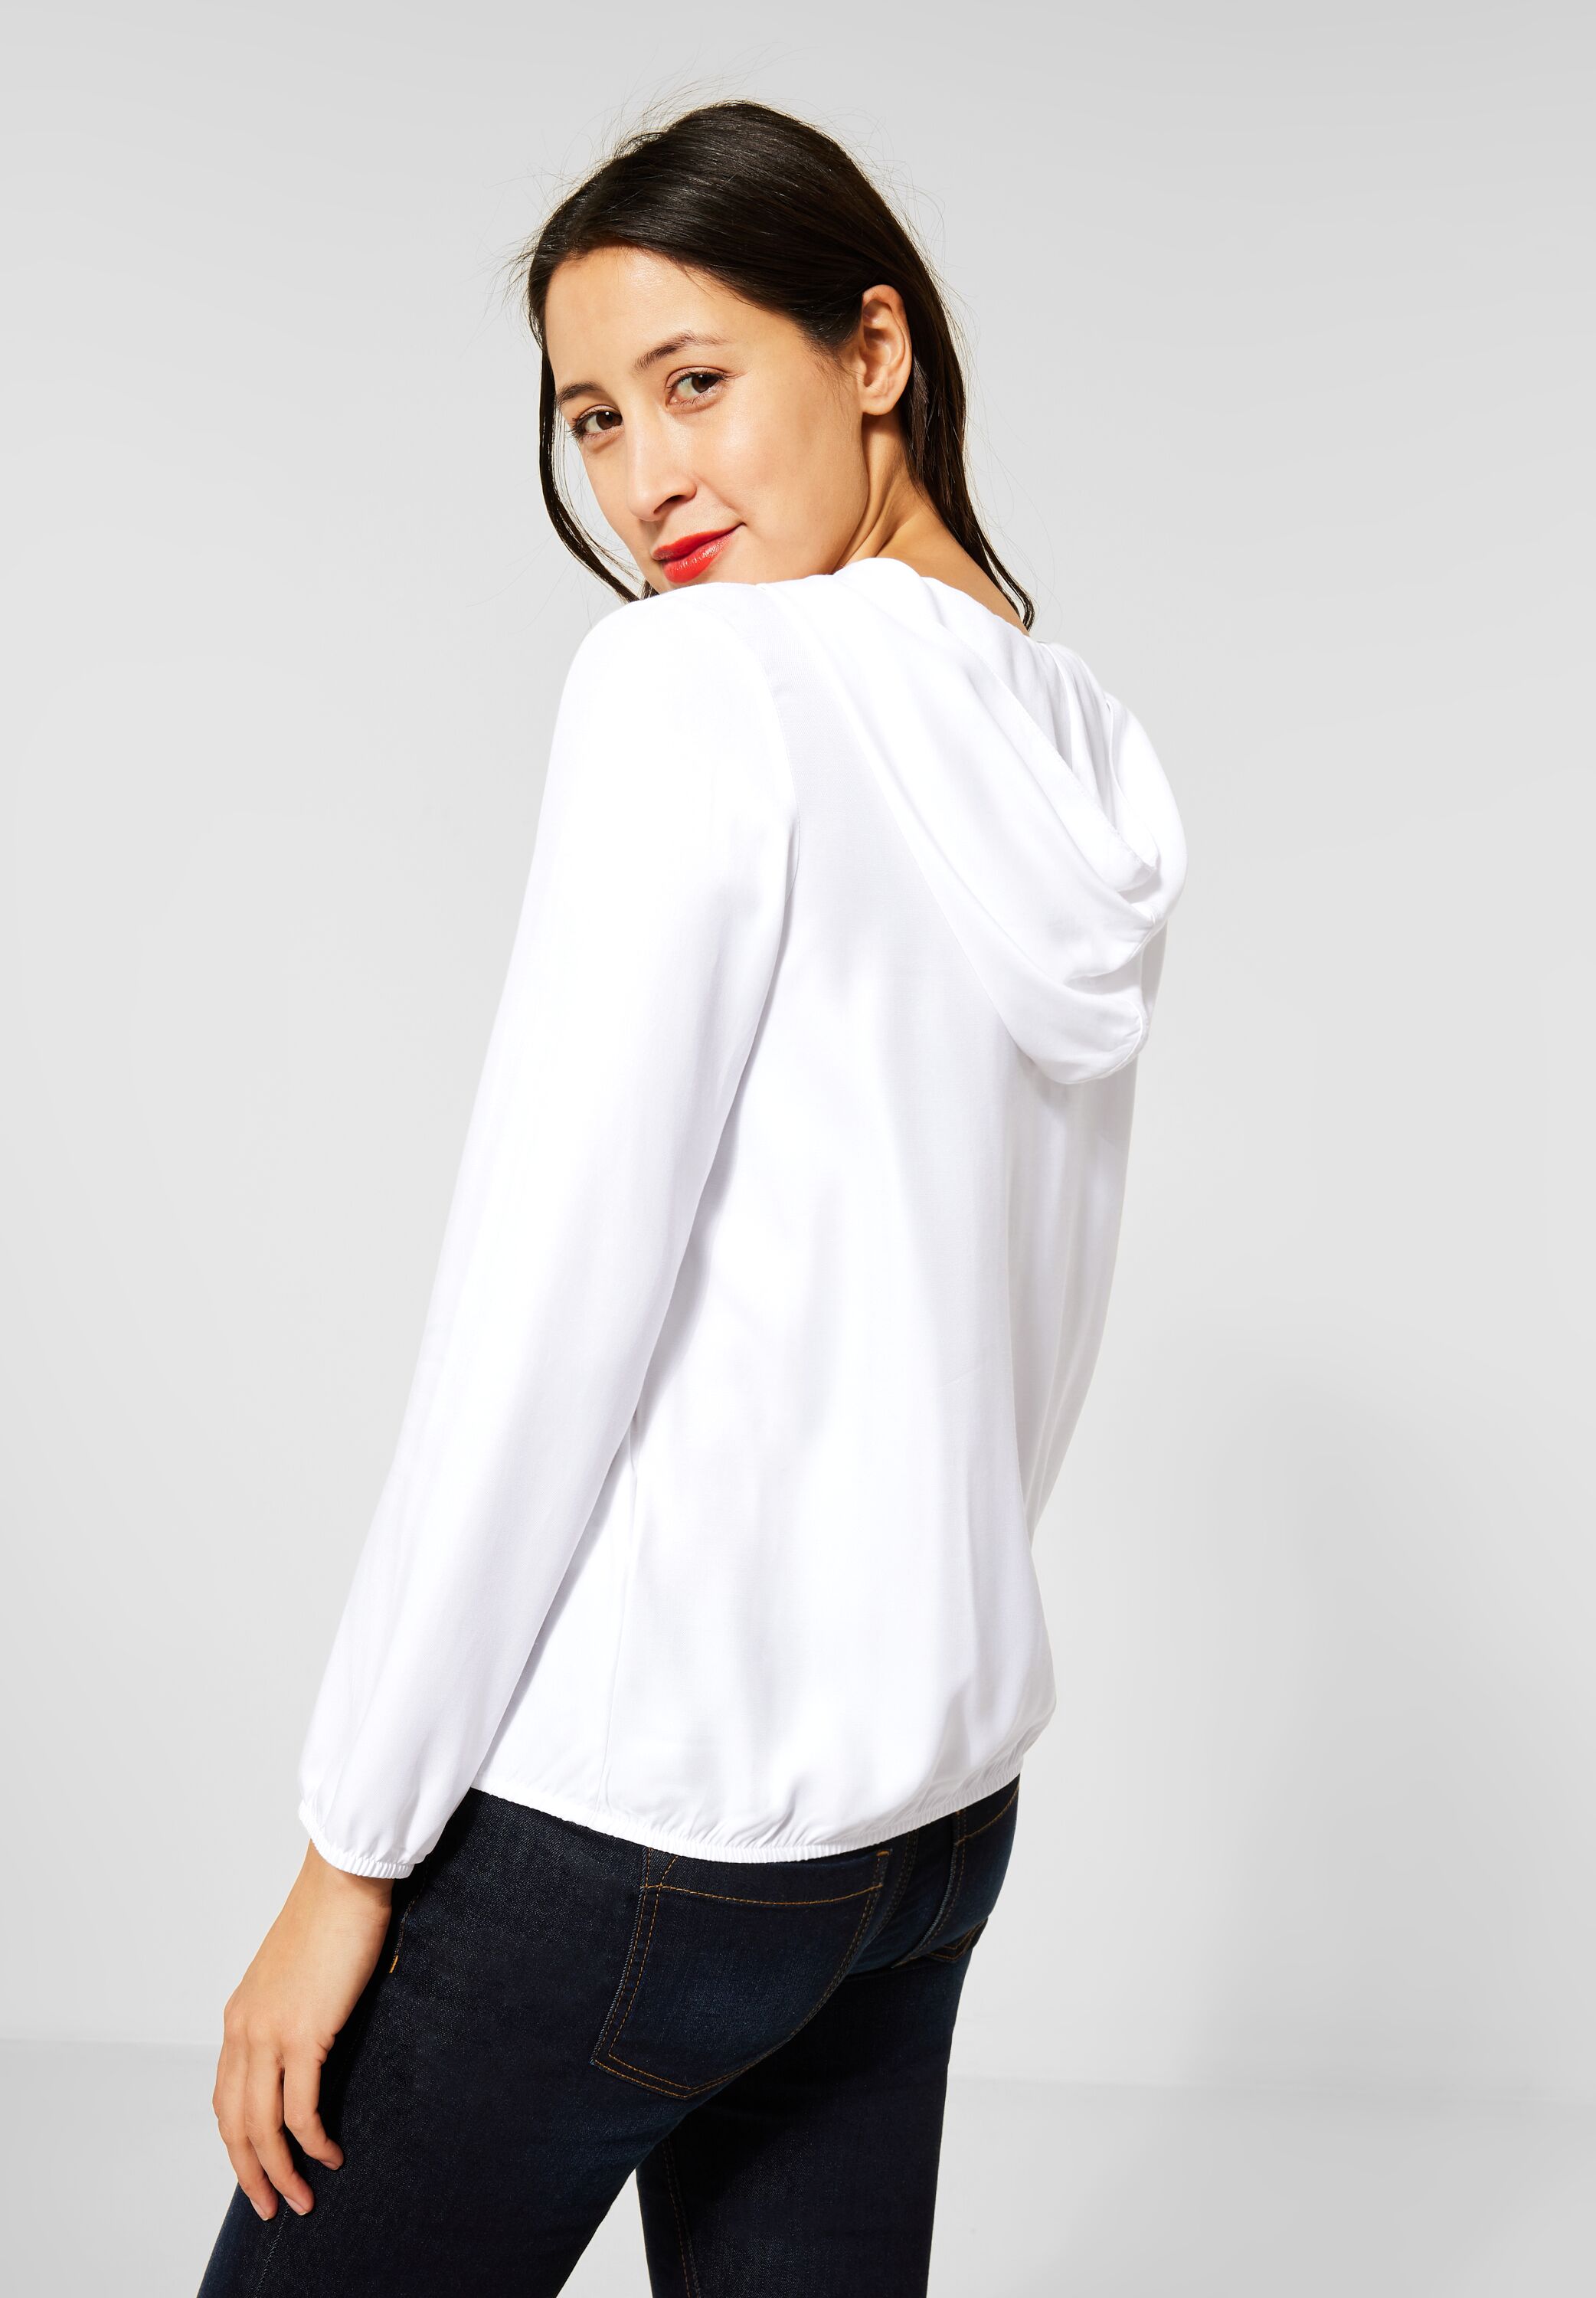 in A342414-10000 - Bluse White Mode Street One CONCEPT